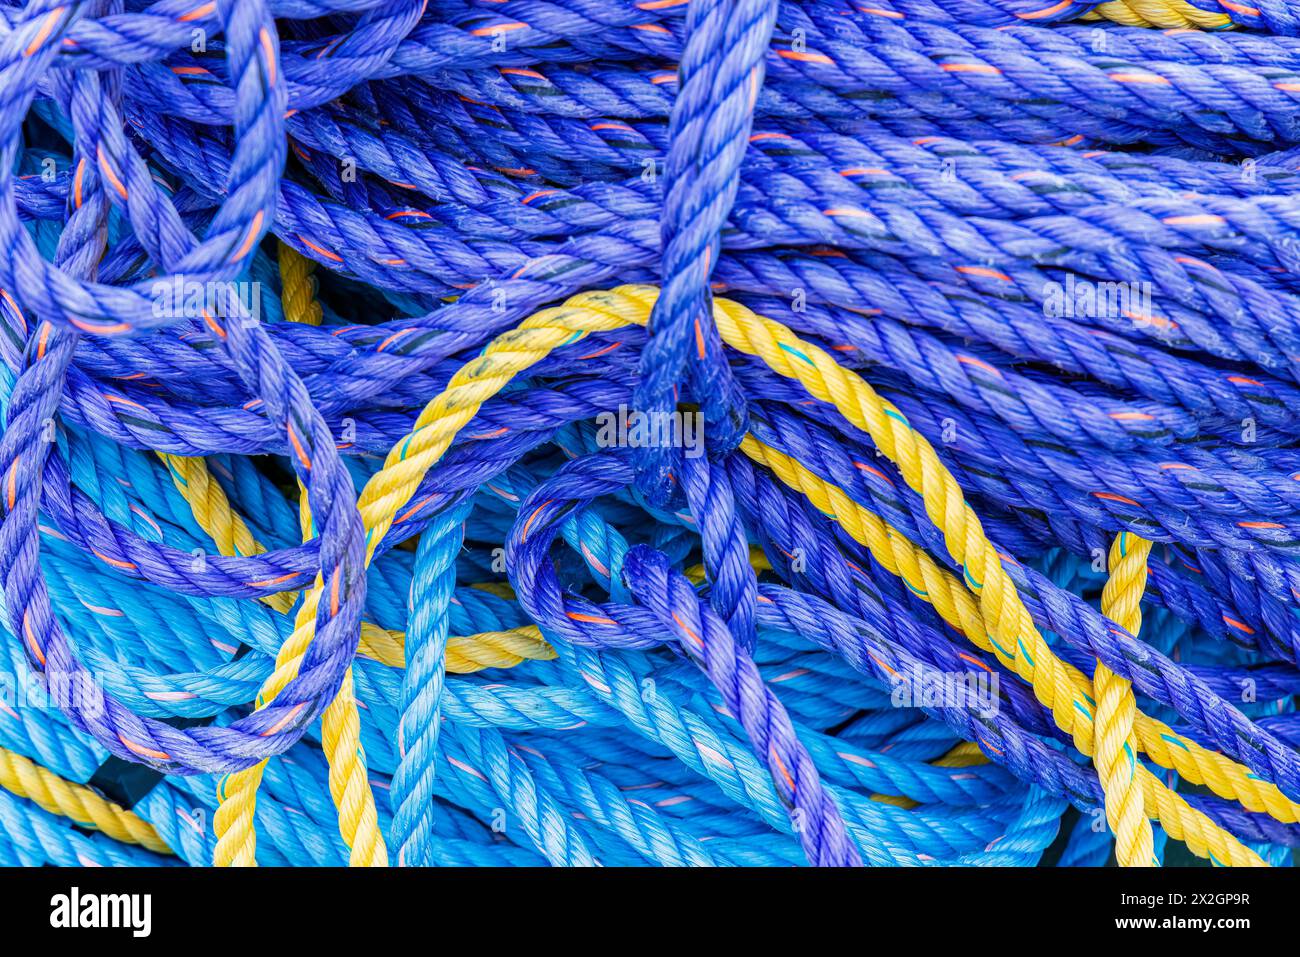 60895-03510 Colored Rope on dock at Fisherman's Cove Eastern Passage, NS Canada Stock Photo